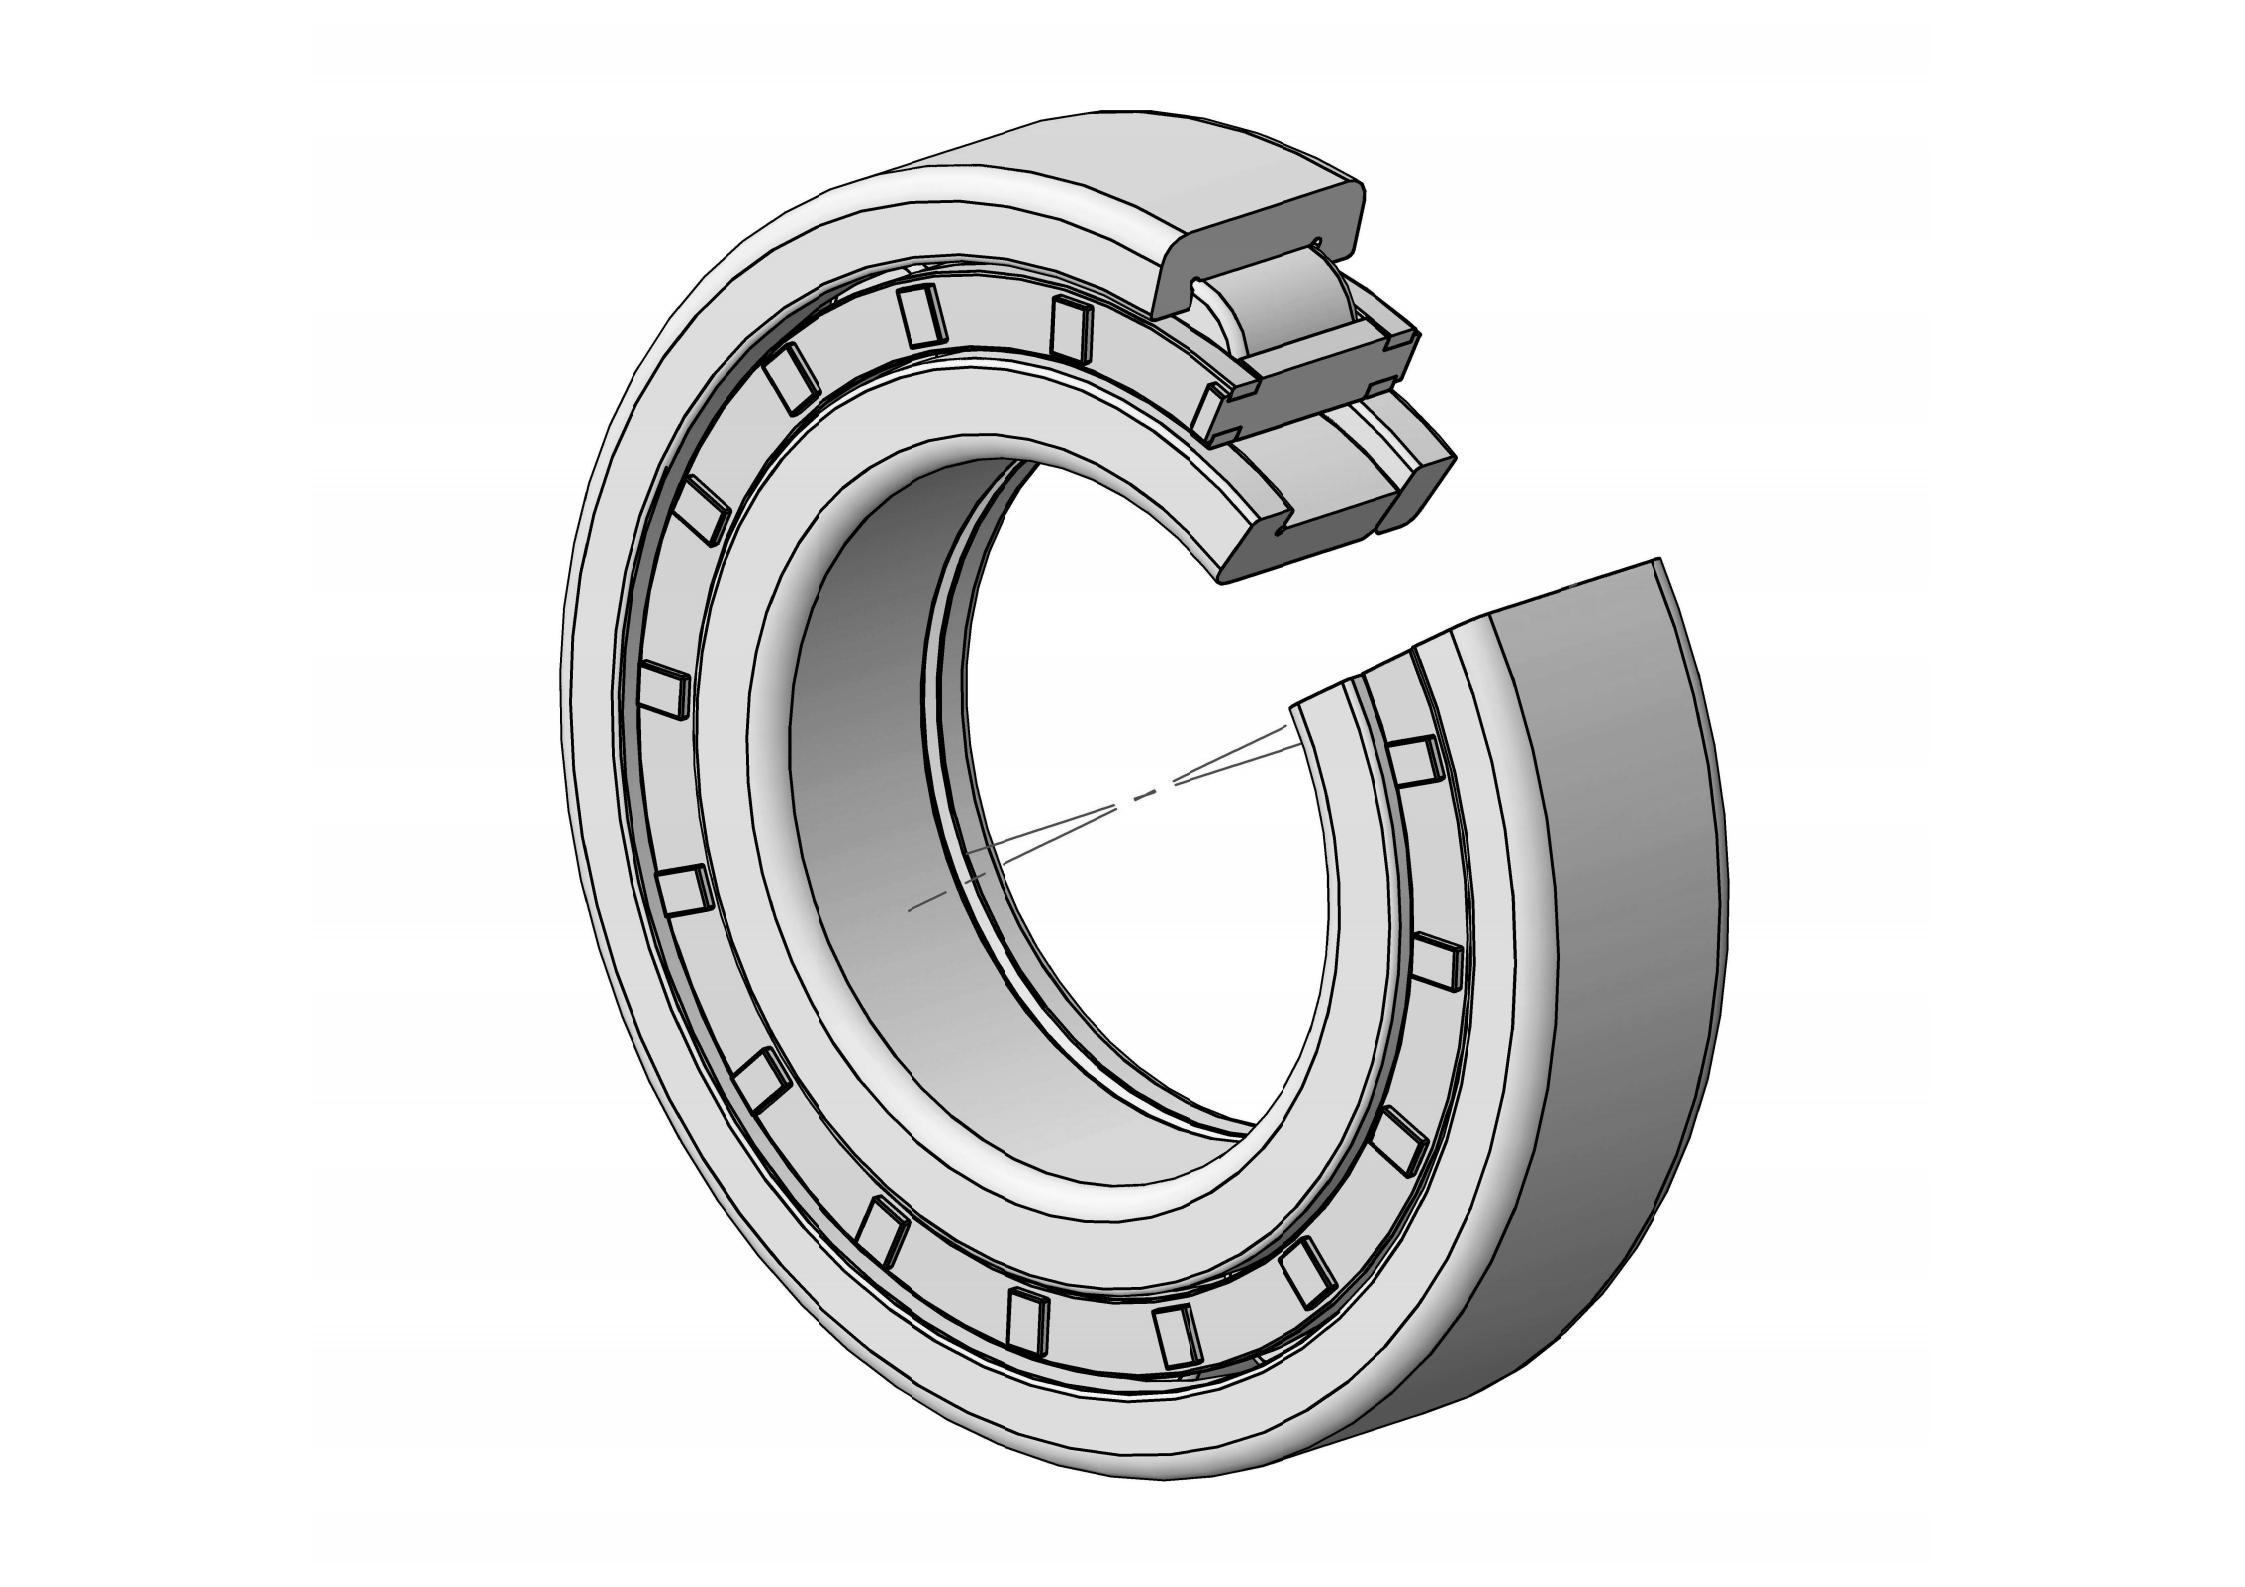 NUP2236-EM Ẹyọkan Row Cylindrical rola bearing